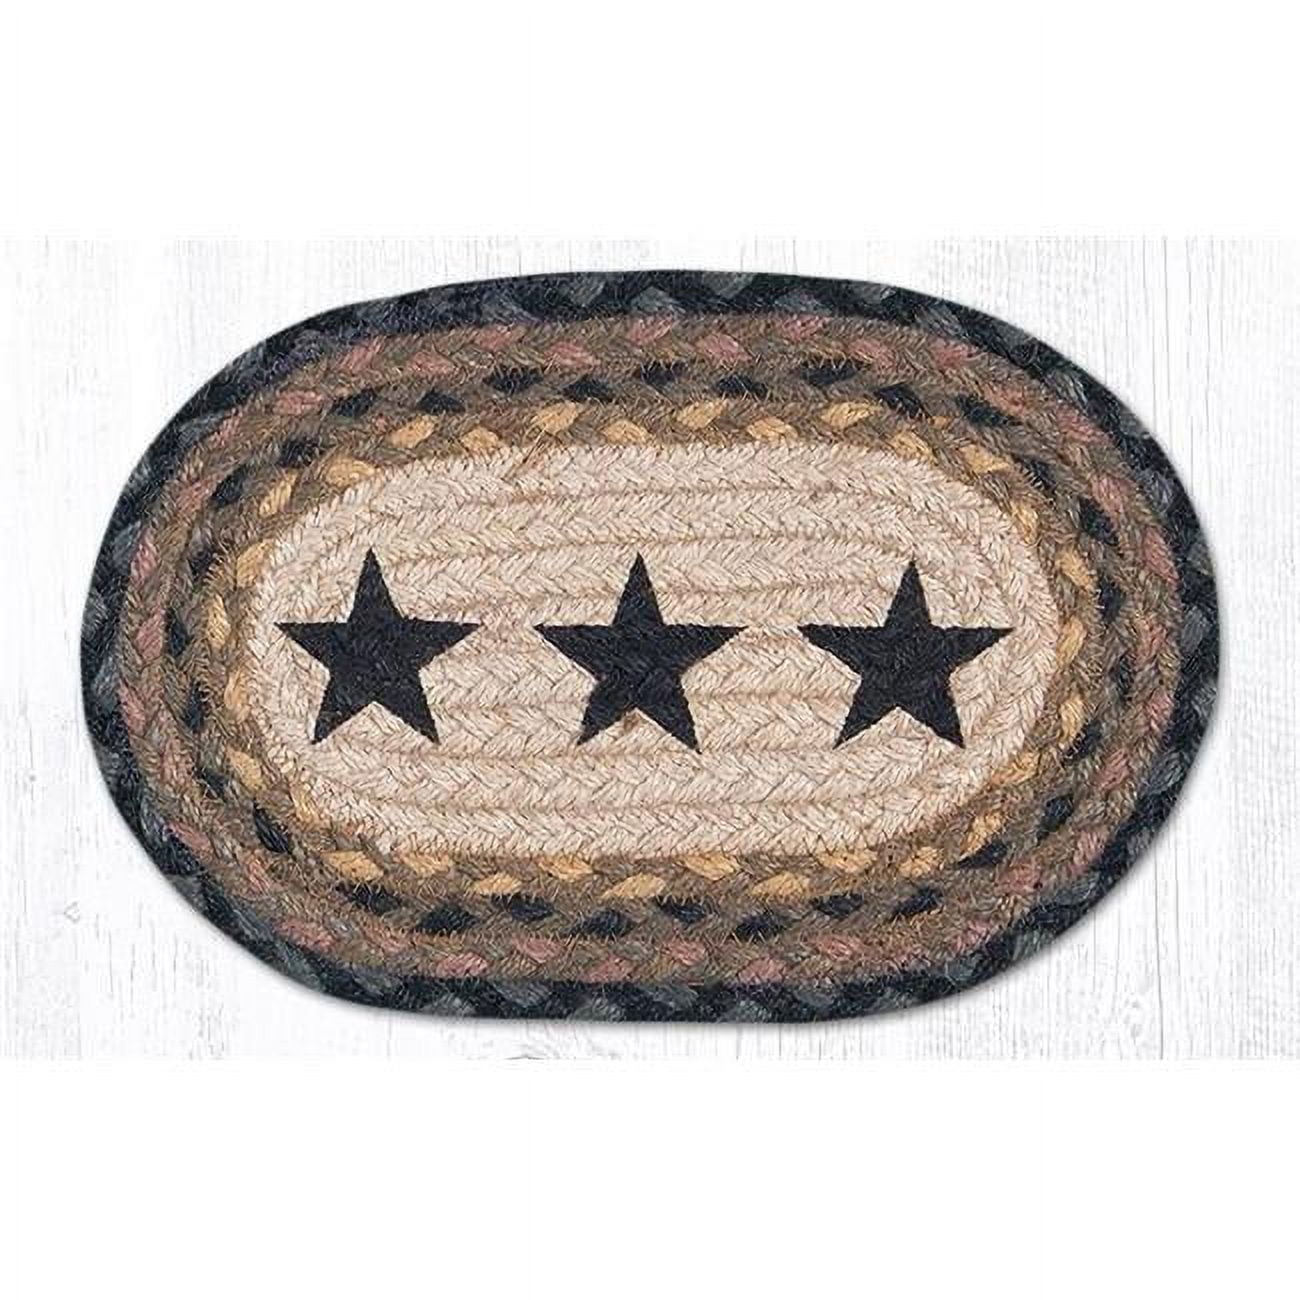 Capitol Importing 01-099bs Black Stars Printed Swatch Oval Rug, 7.5 X 11 In.